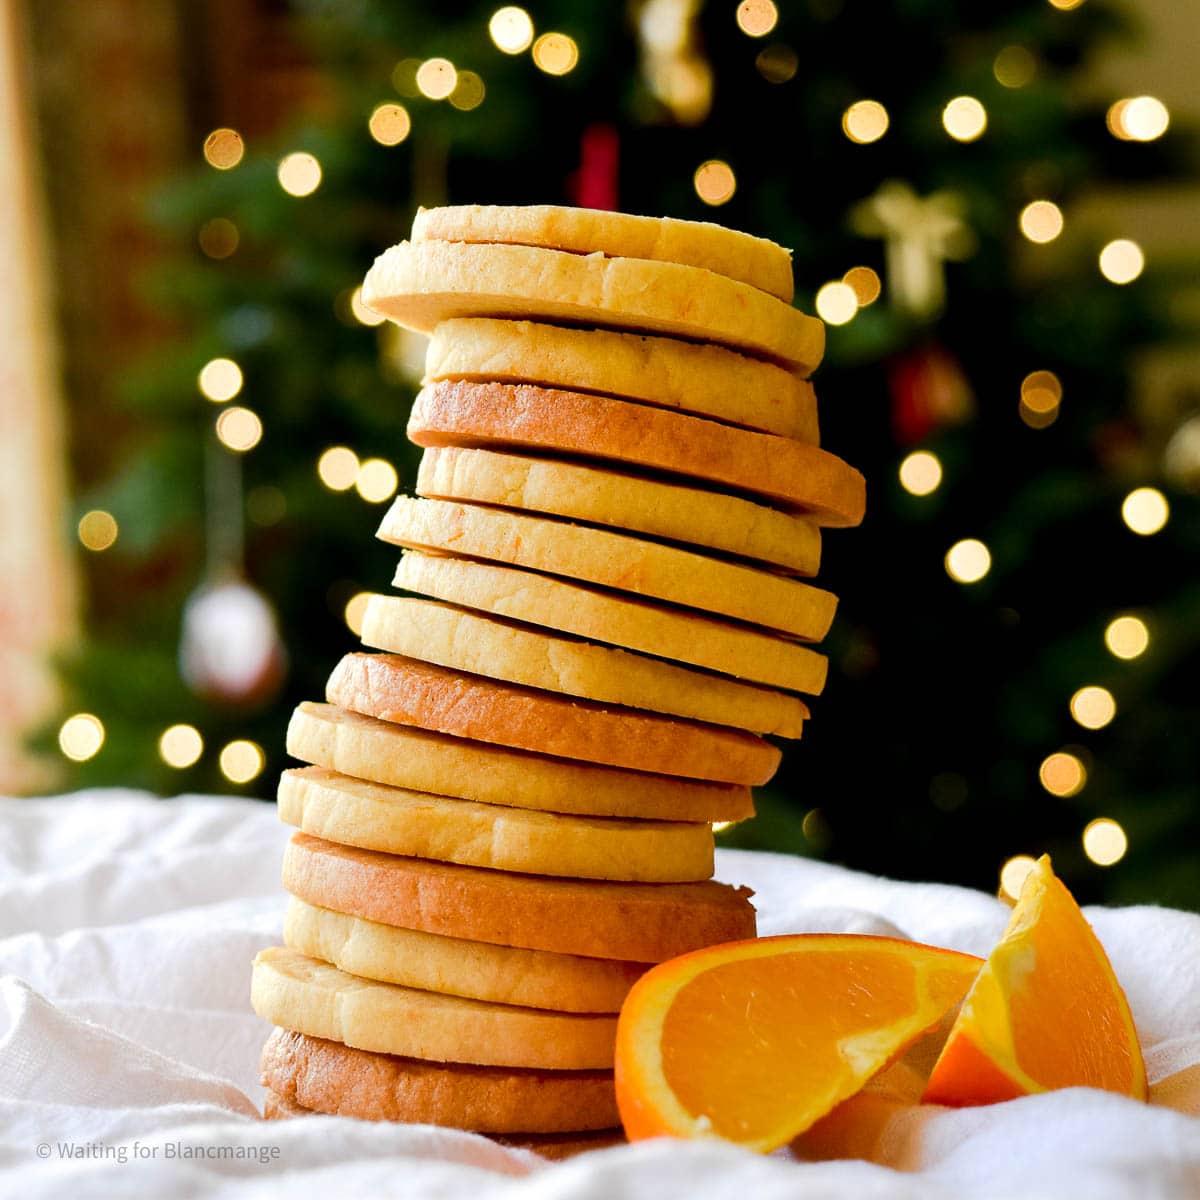 Stack of orange shortbread cookies with Christmas tree in the background.